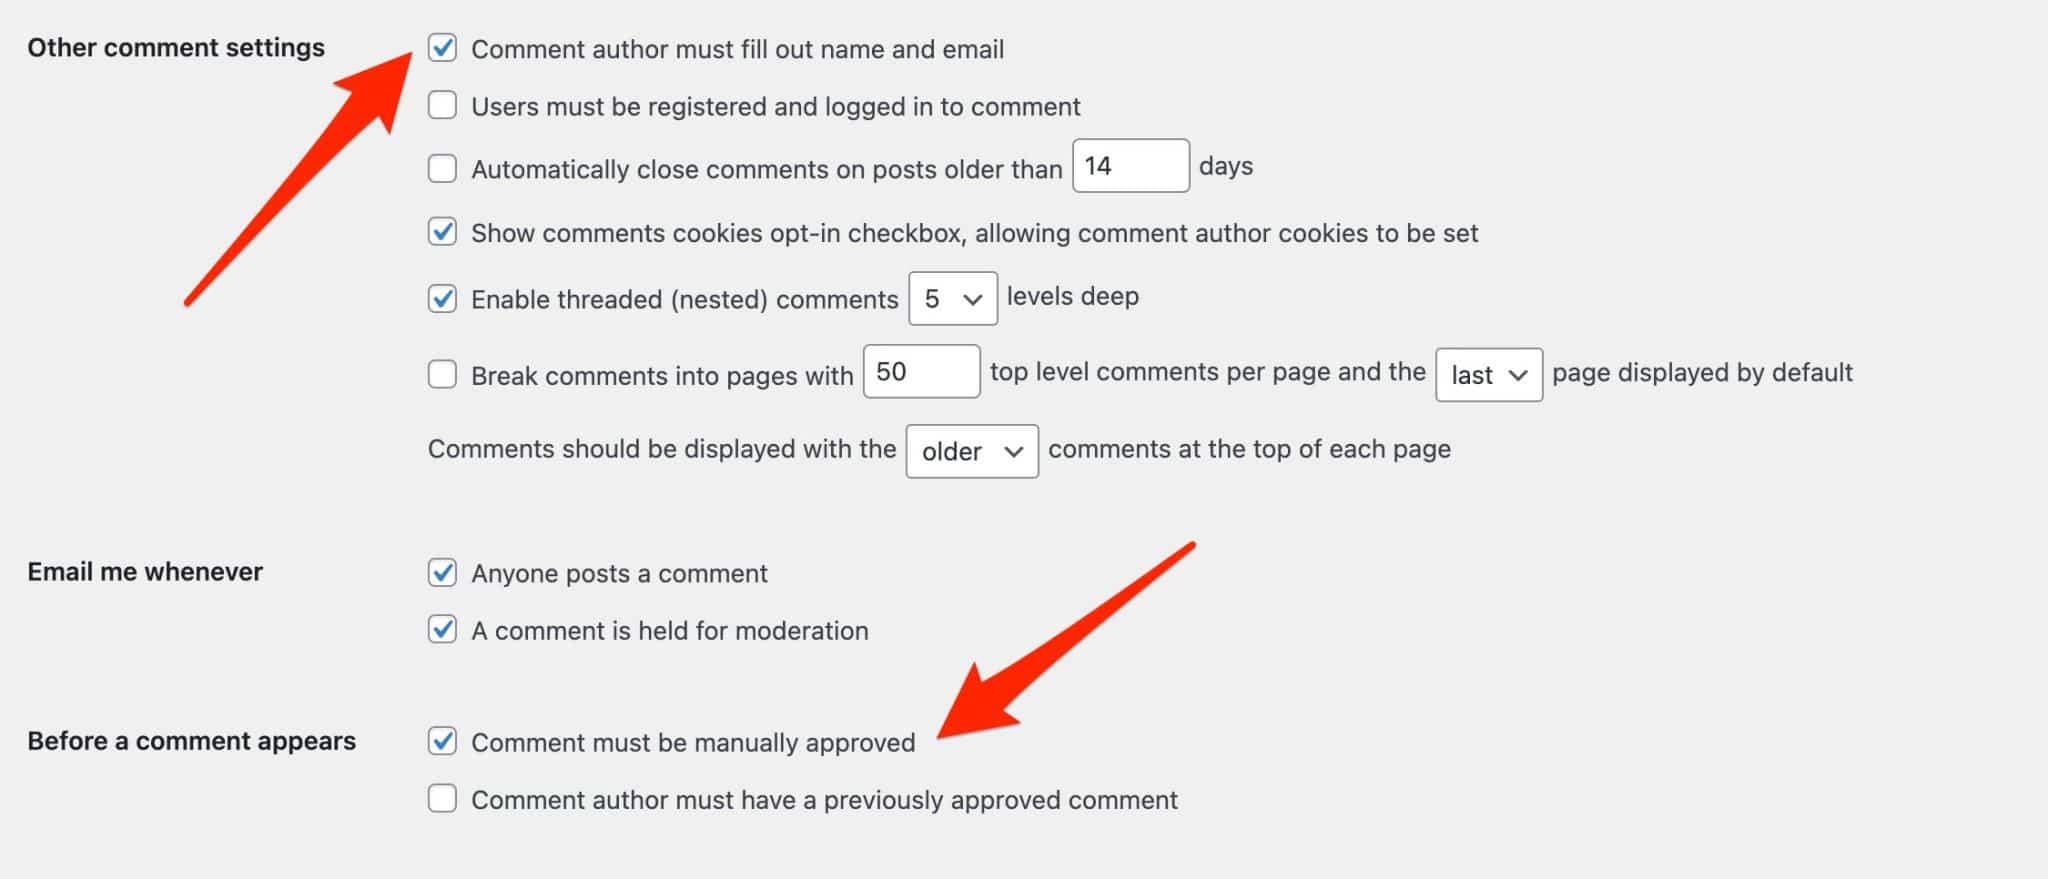 Comments settings in the discussion menu on WordPress.